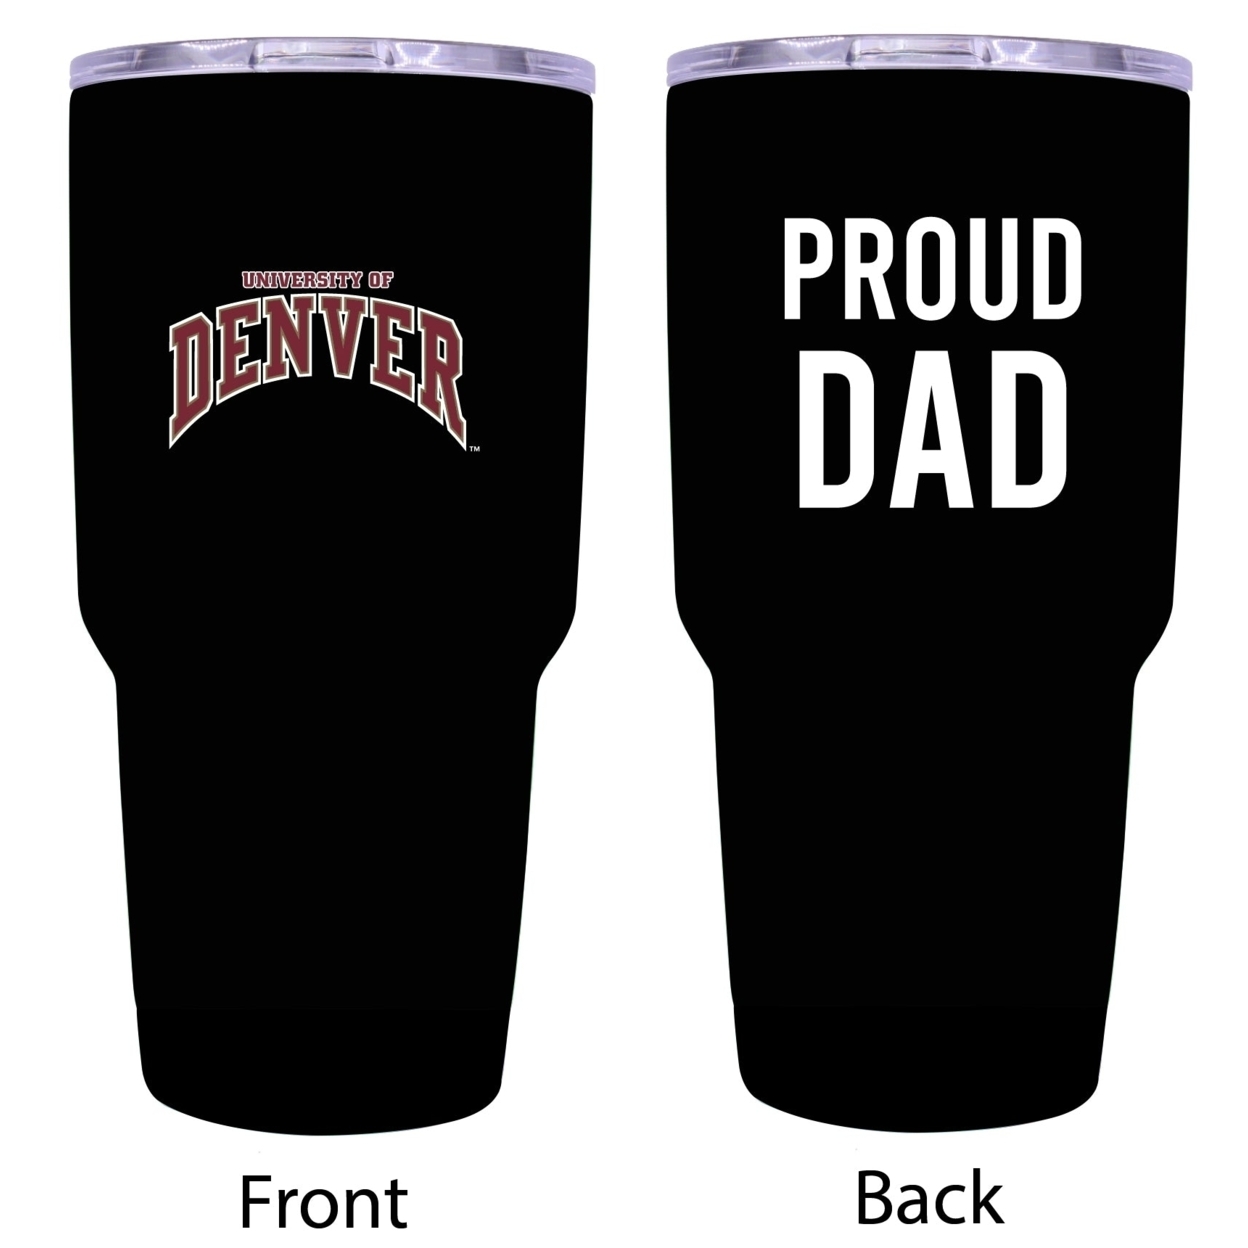 University Of Denver Pioneers Proud Dad 24 Oz Insulated Stainless Steel Tumblers Choose Your Color. - Black